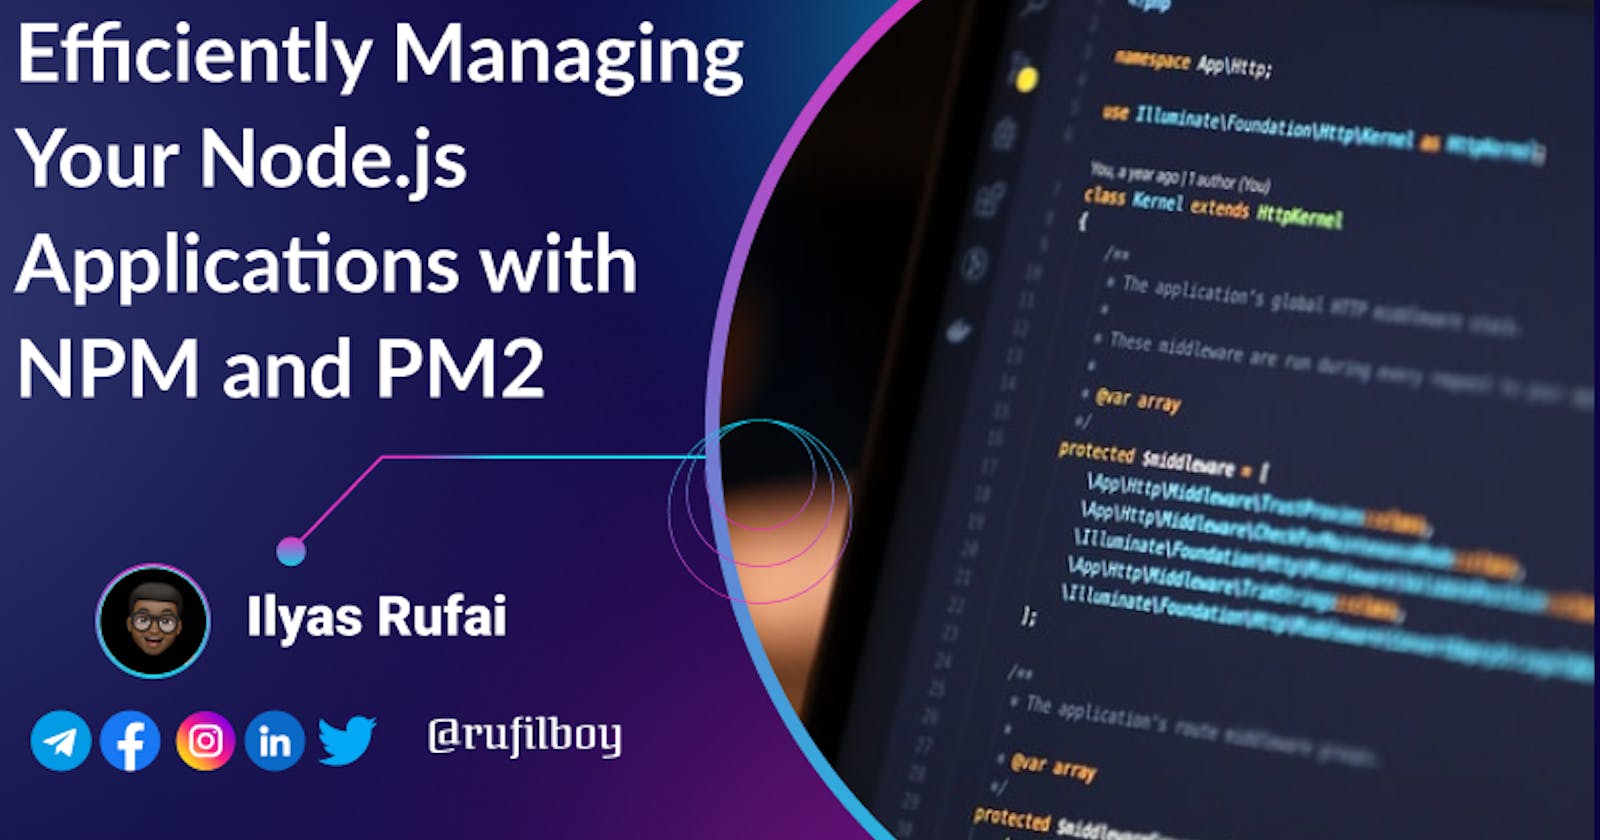 Efficiently Managing Your Node.js Applications with NPM and PM2